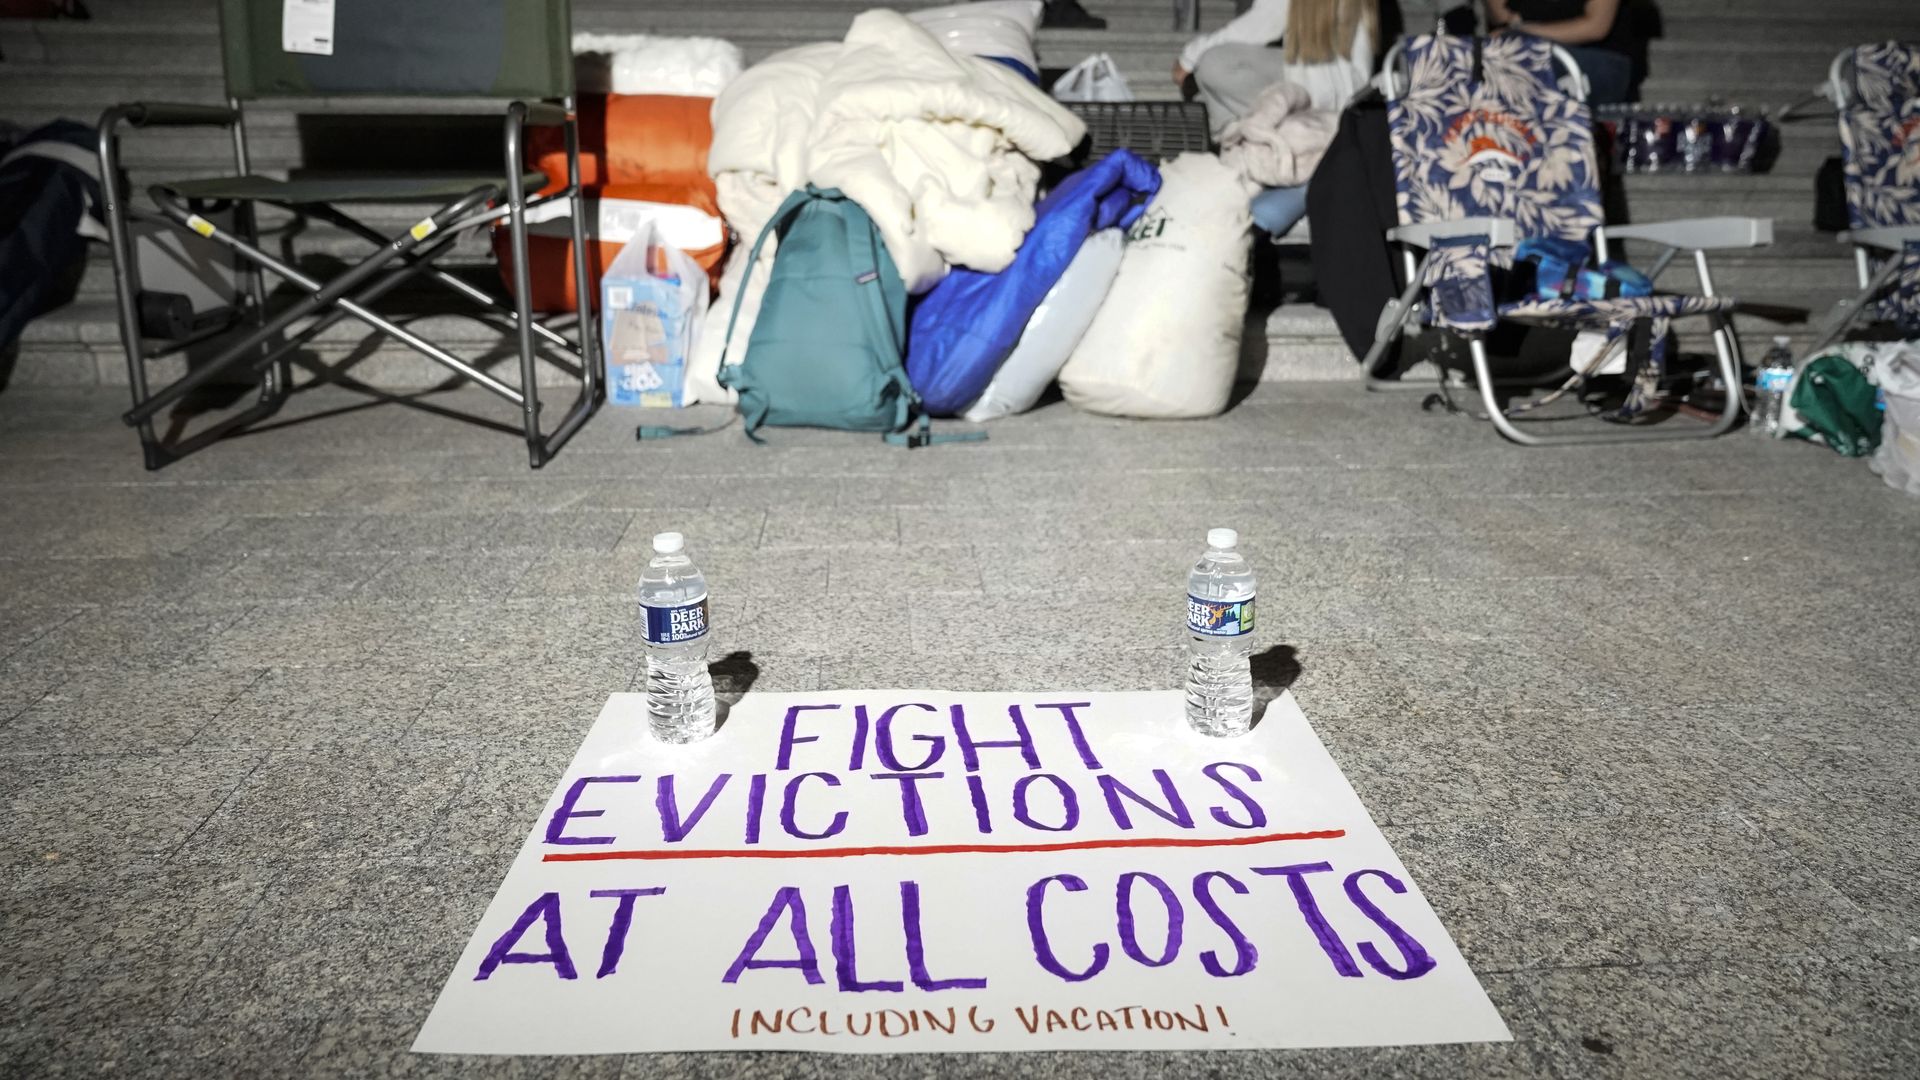 A sign calling for fighting evictions is set on the ground as Rep. Cori Bush (D-MO) spends the night outside the U.S. Capitol.